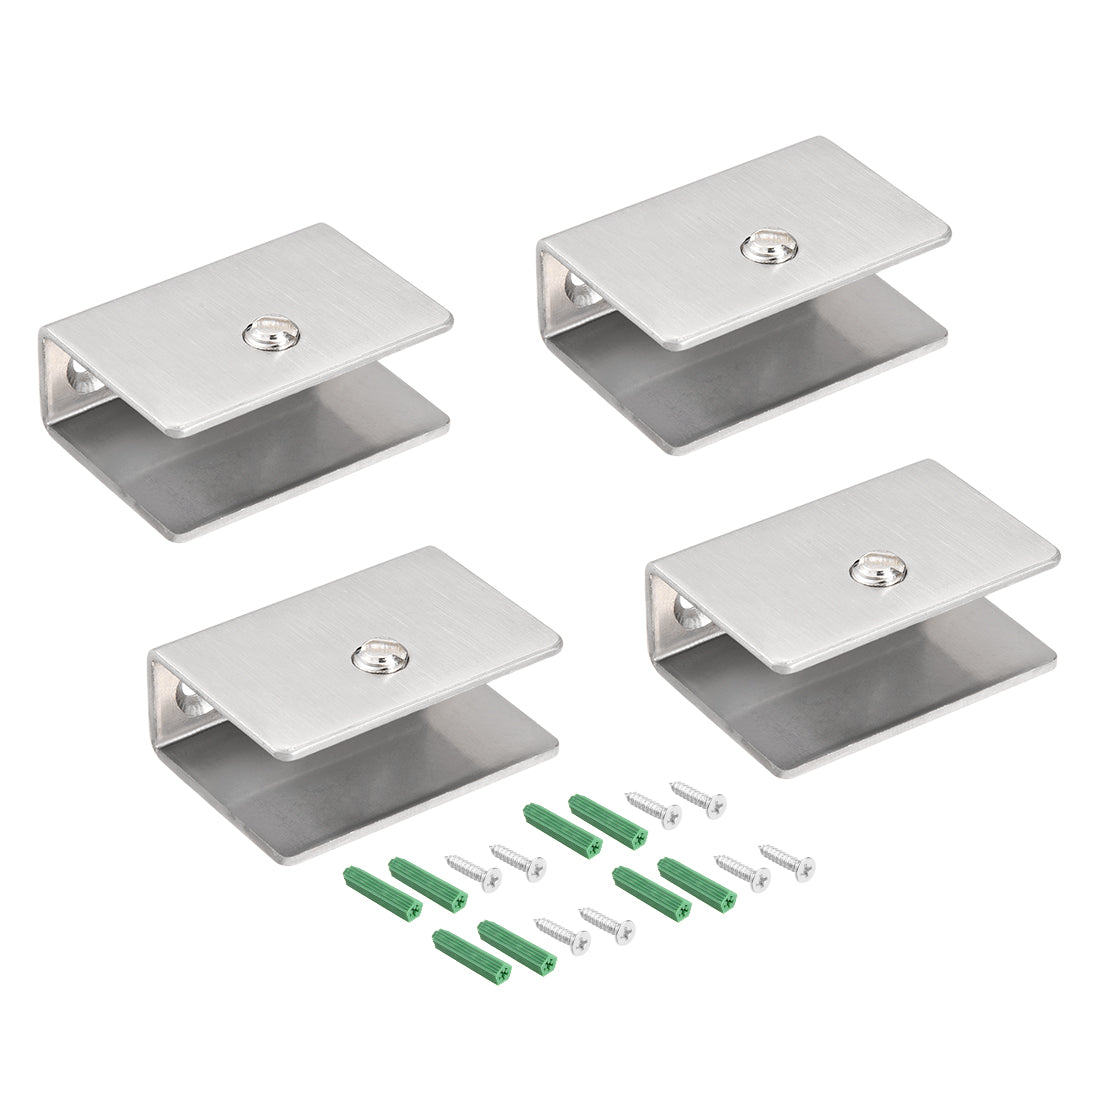 uxcell Uxcell Glass Shelf Brackets Stainless Steel Holder Rectangle for 10-14mm Thickness 4pcs